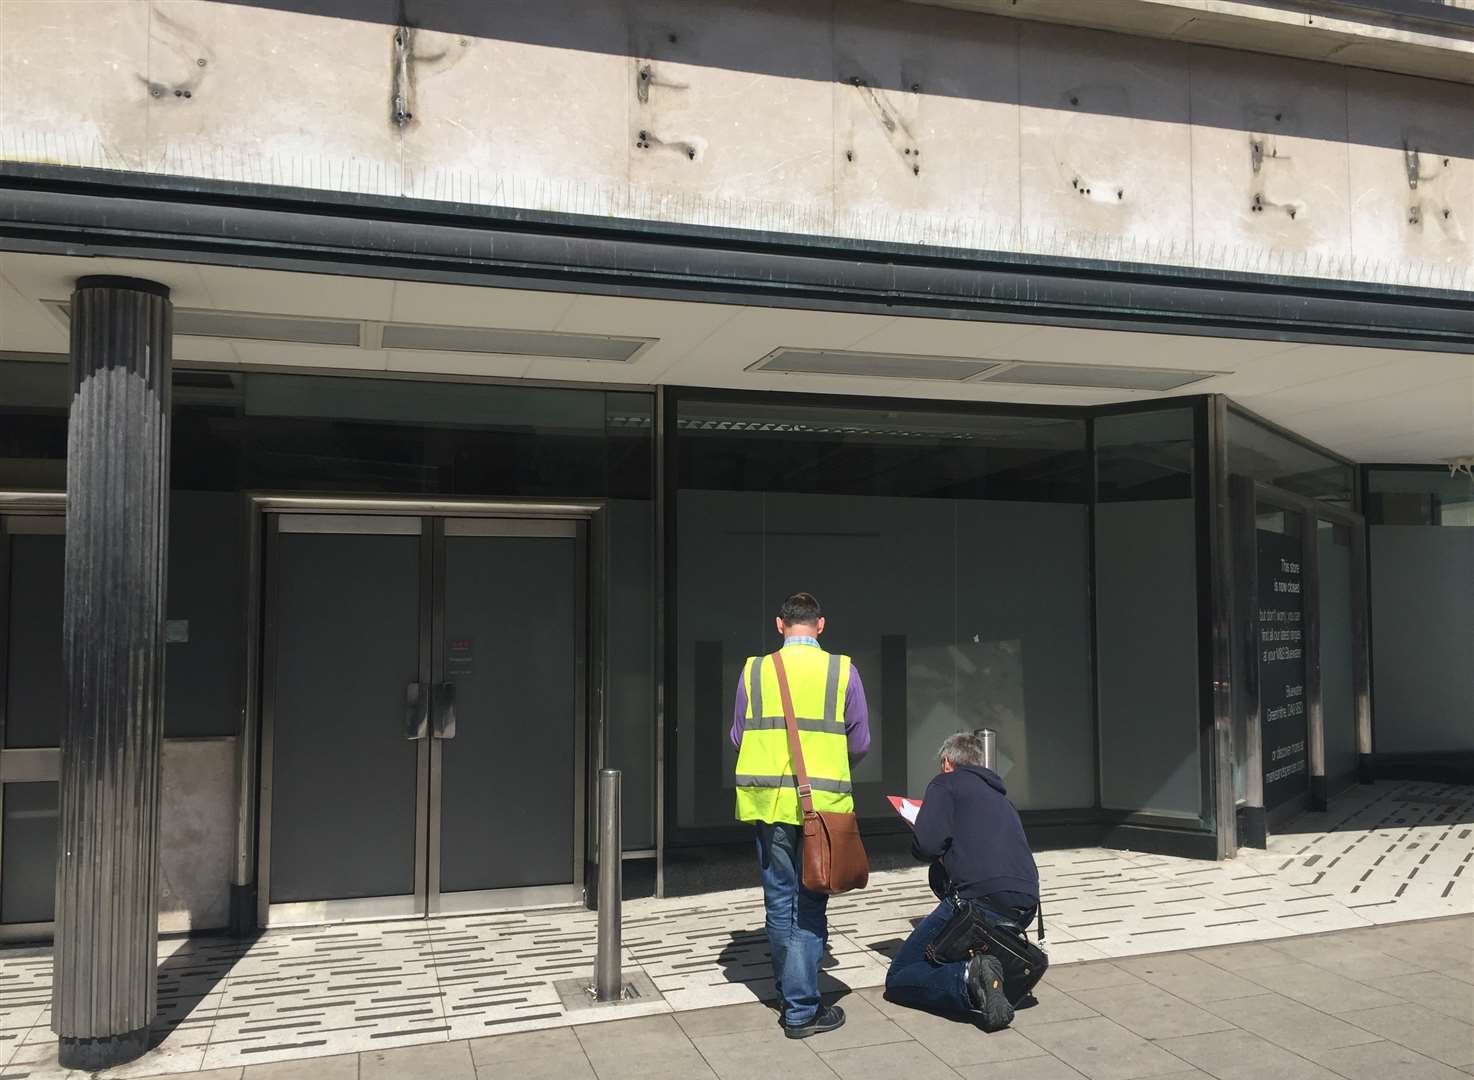 New jobs announced as buyer signs deal to buy old M&S store